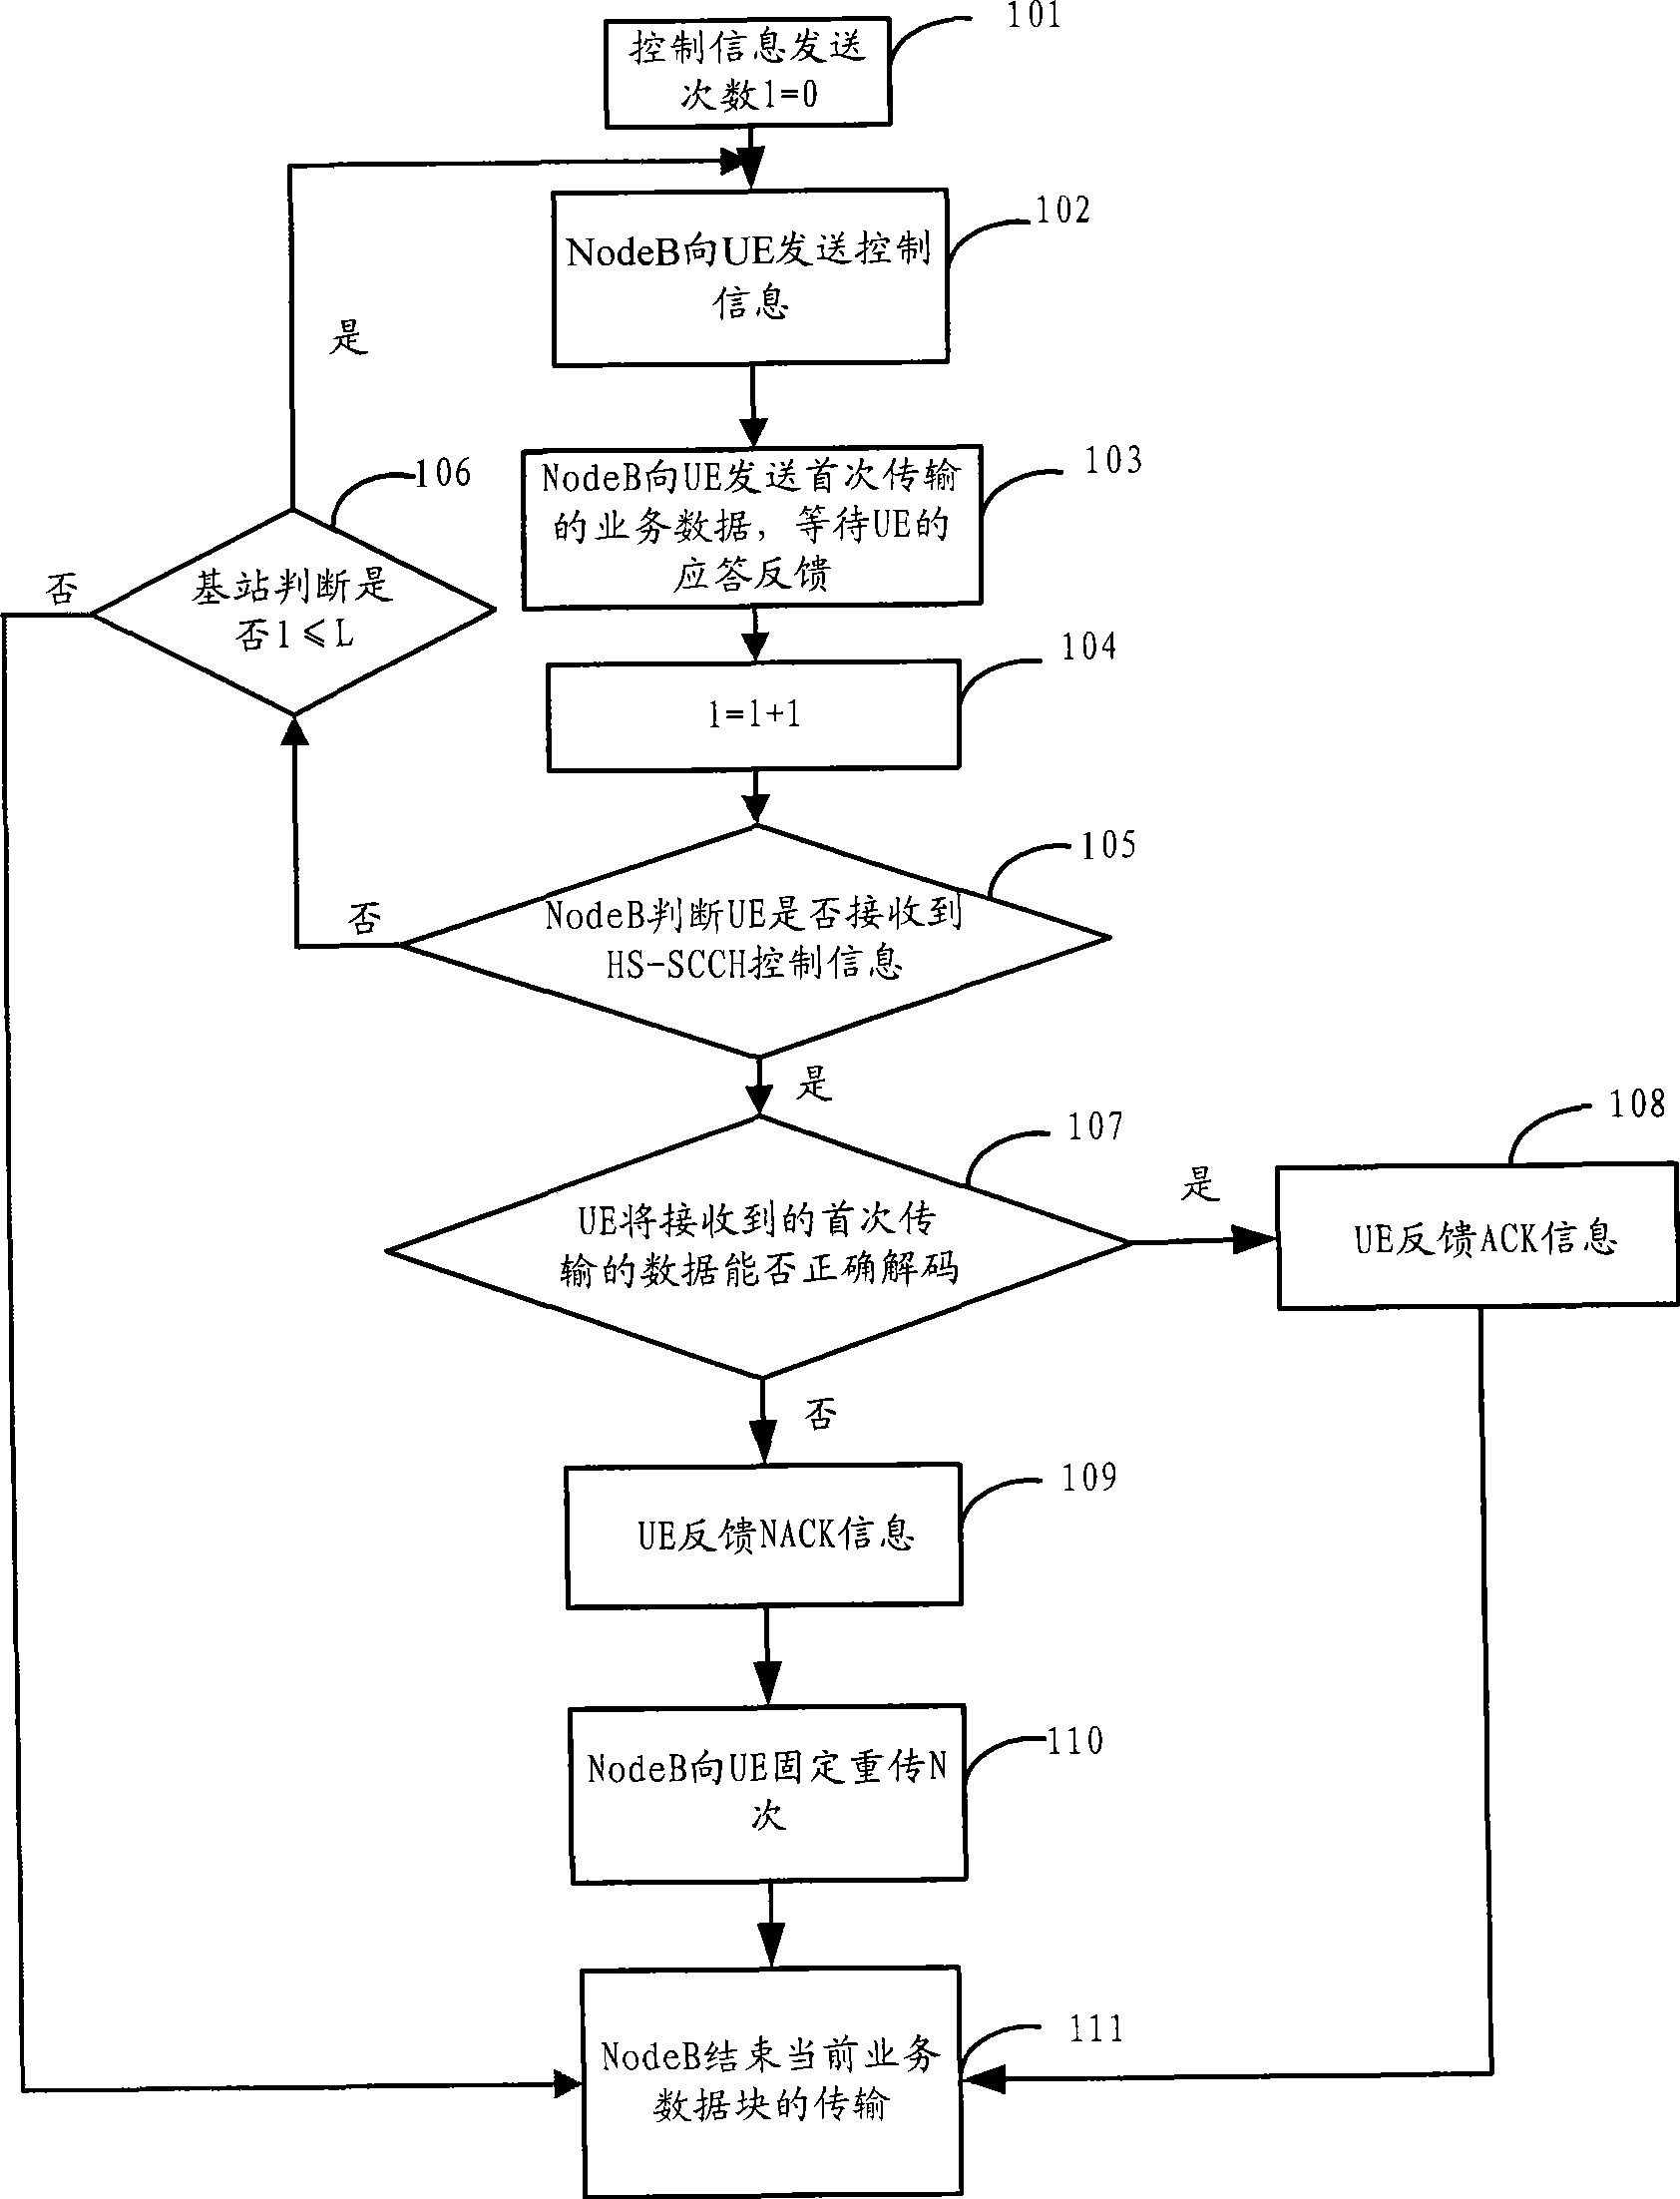 Method, apparatus and system for service data transmission in HSDPA